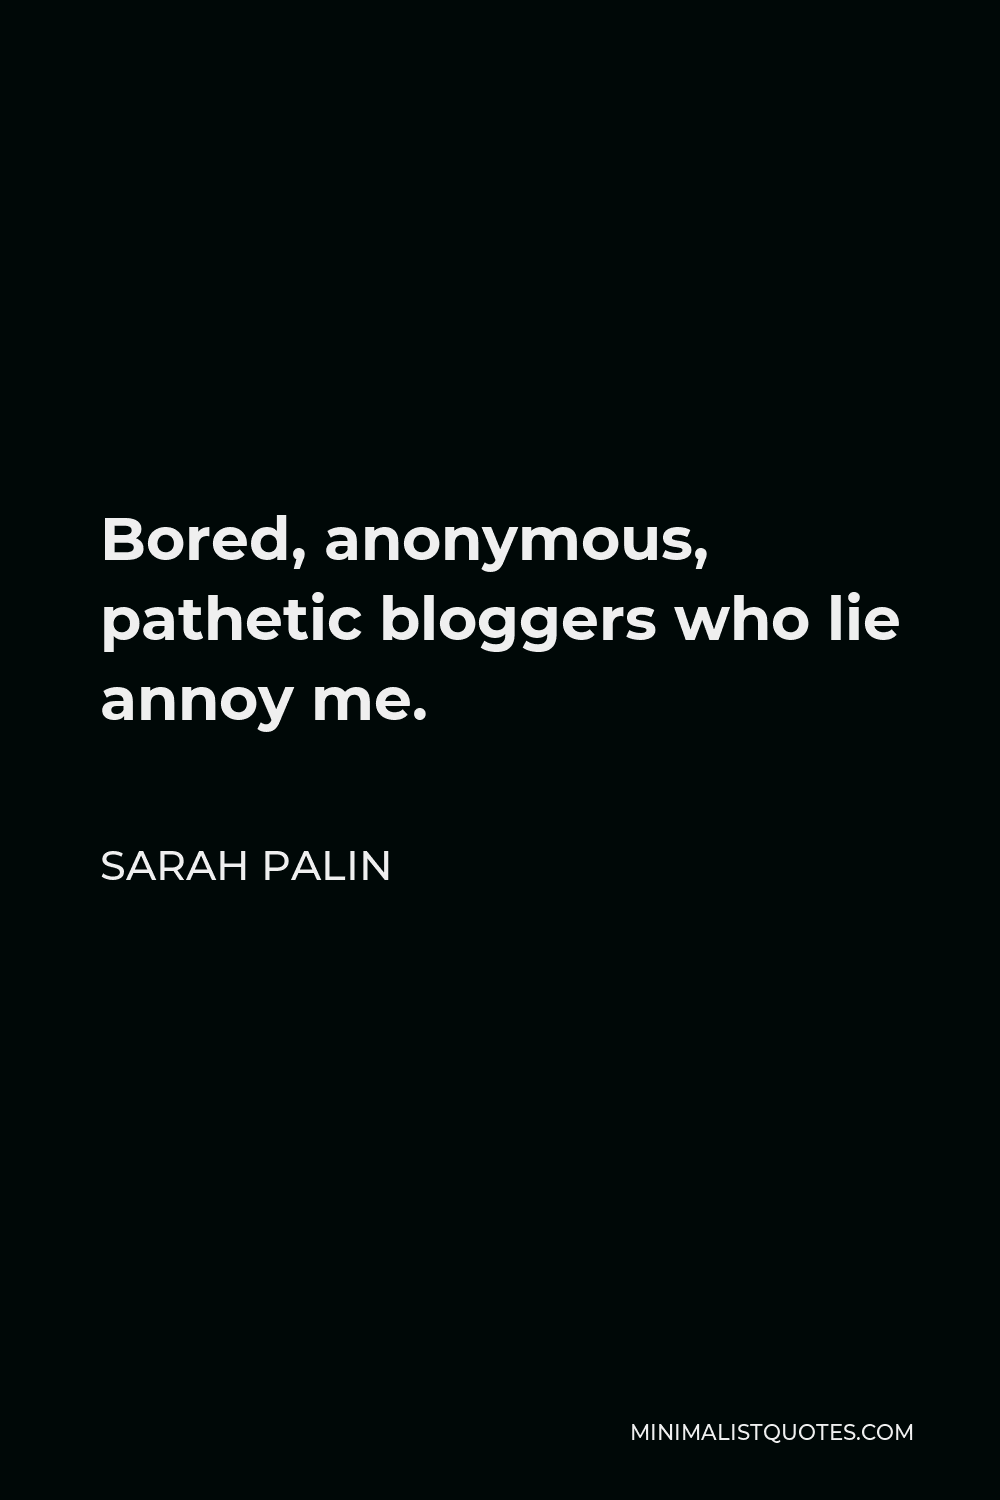 Sarah Palin Quote - Bored, anonymous, pathetic bloggers who lie annoy me.